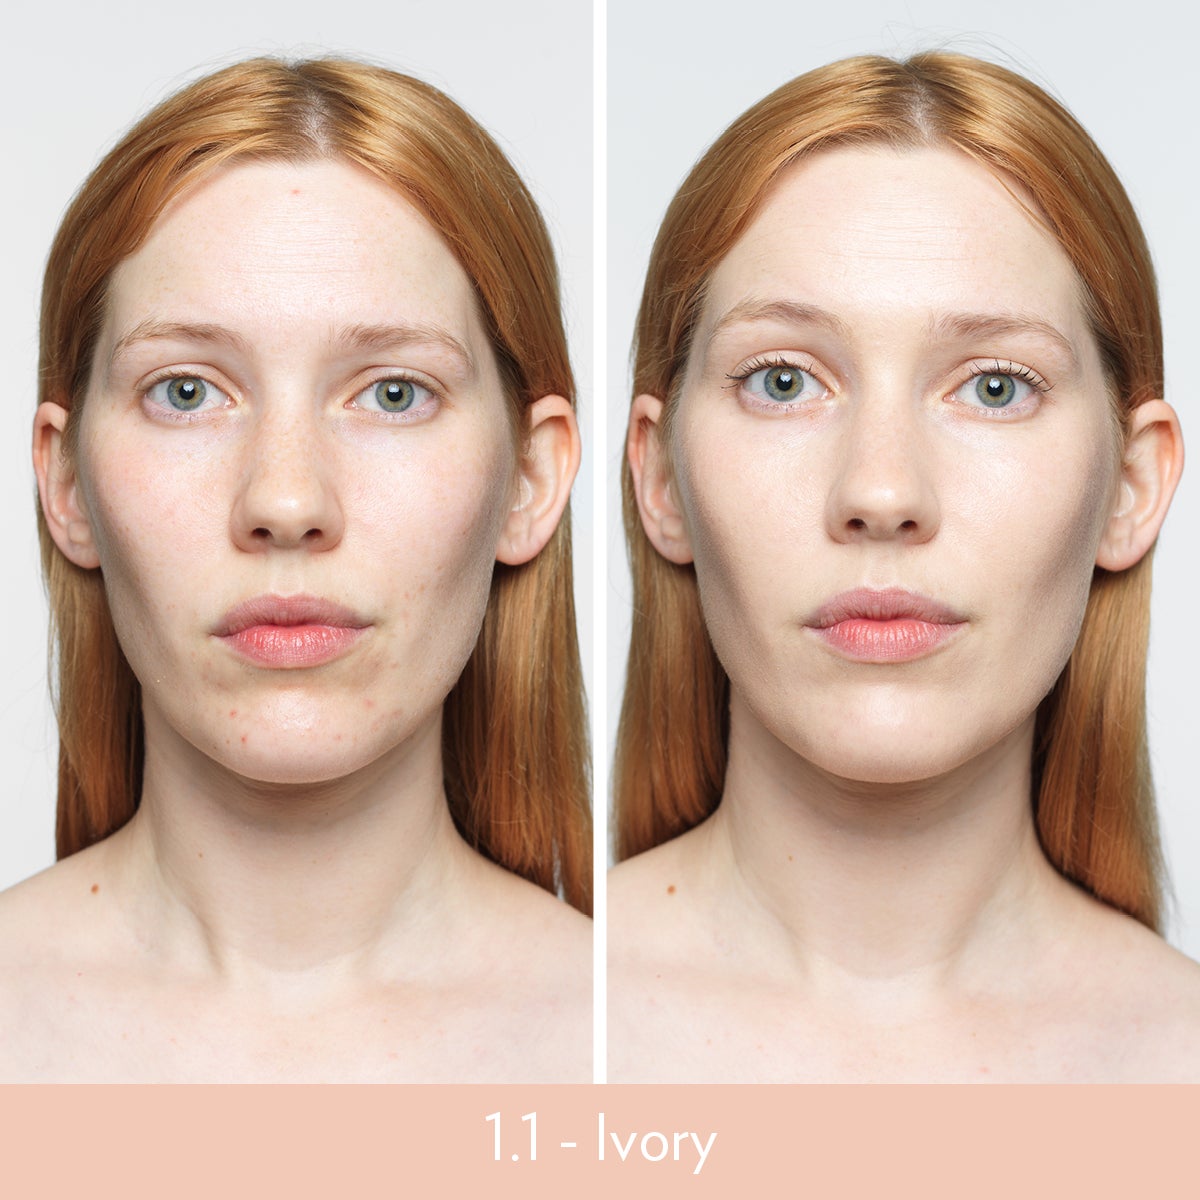 nu-skin-nu-colour-before-and-after-ivory-image.jpg